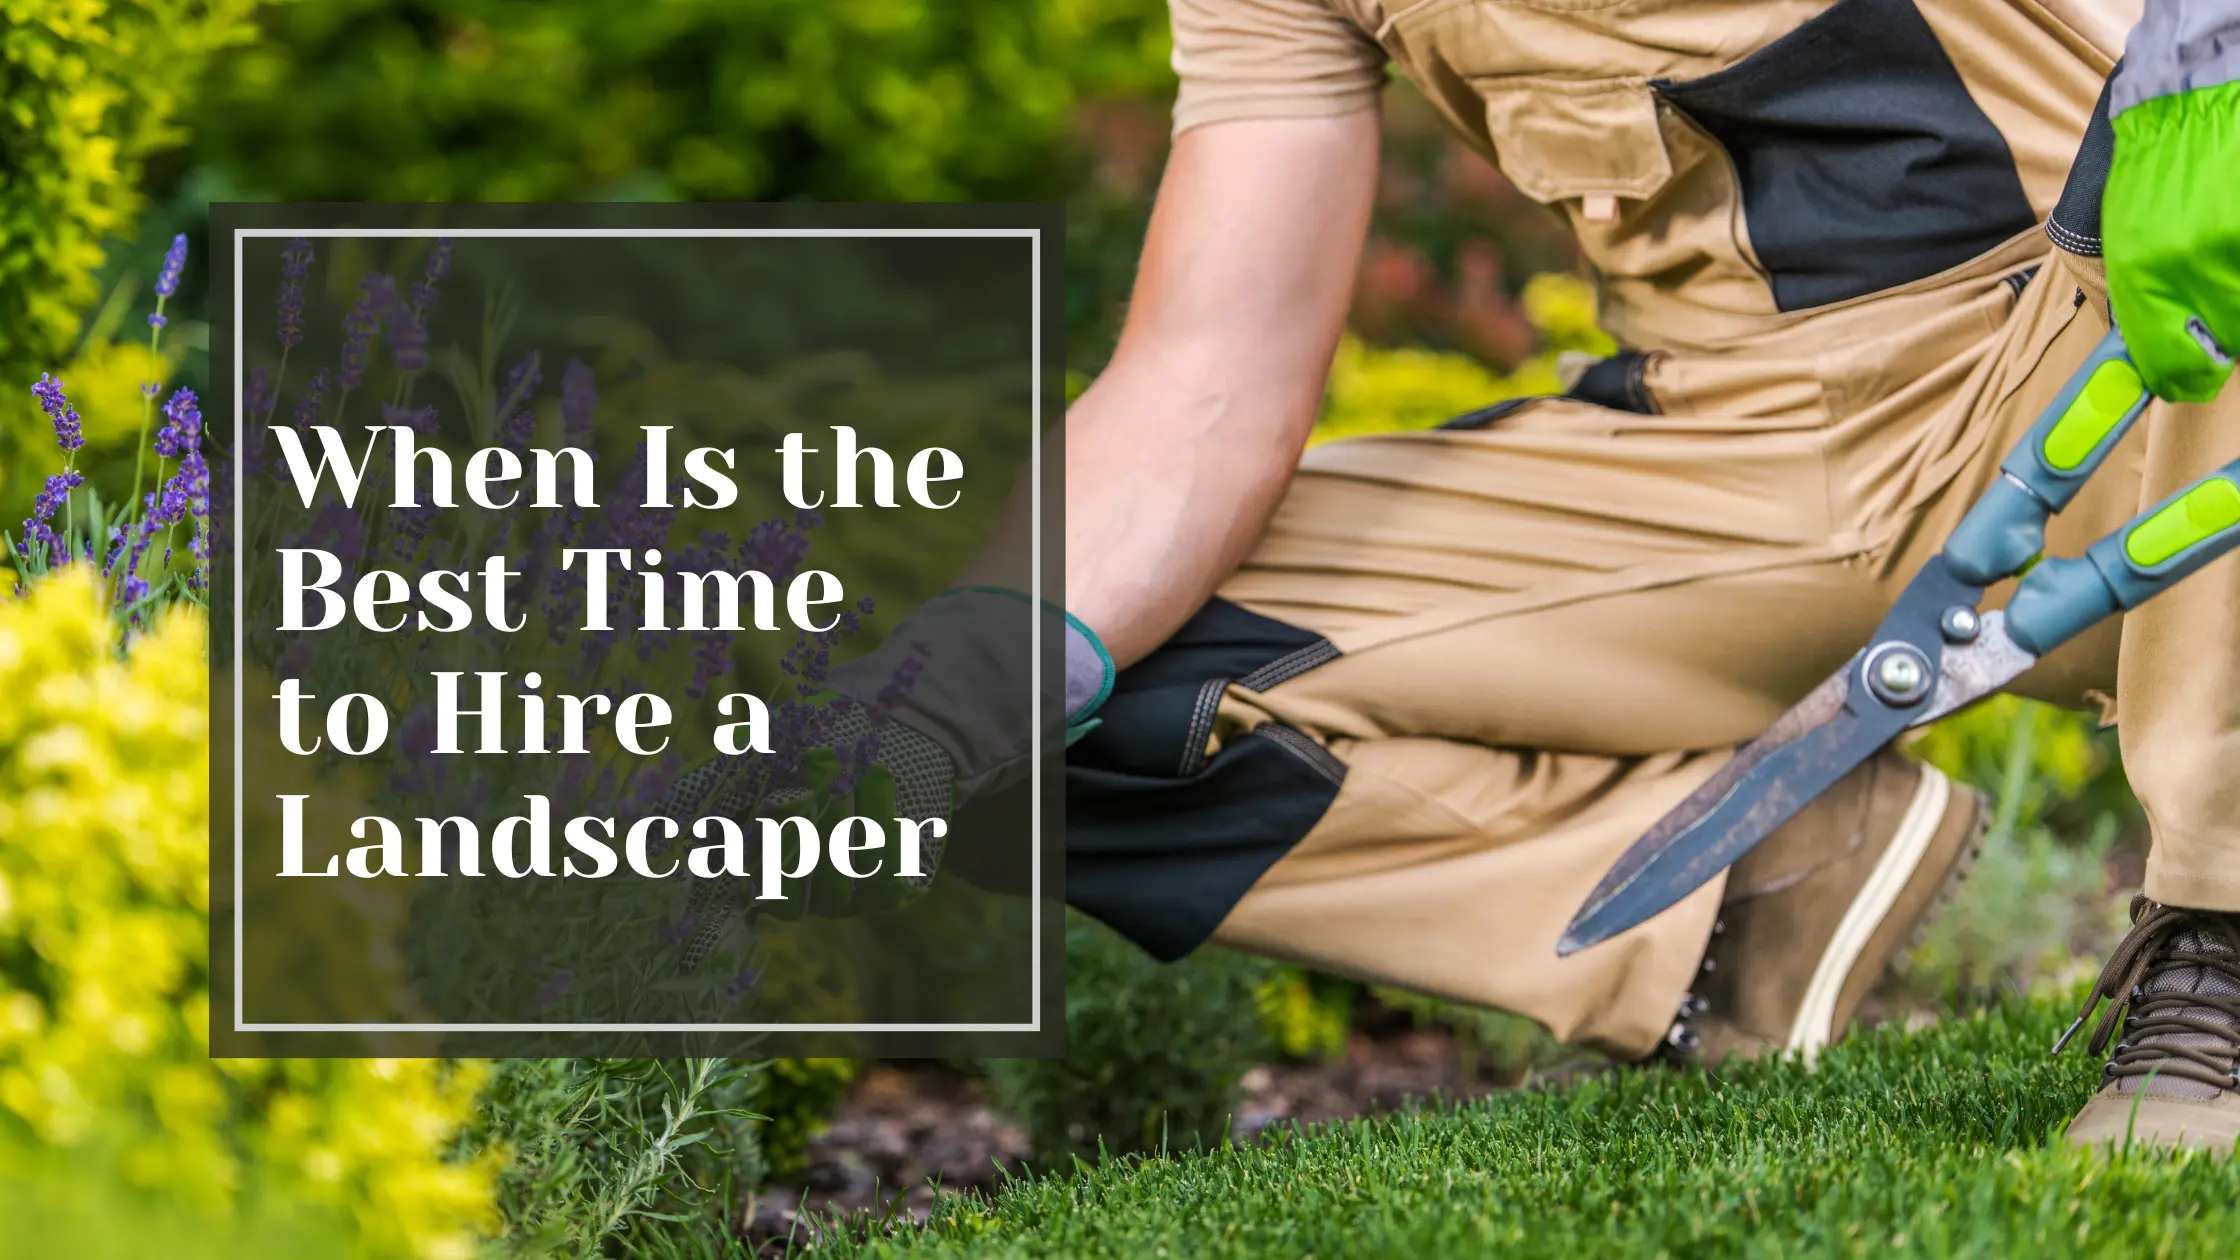 When Is the Best Time to Hire a Landscaper